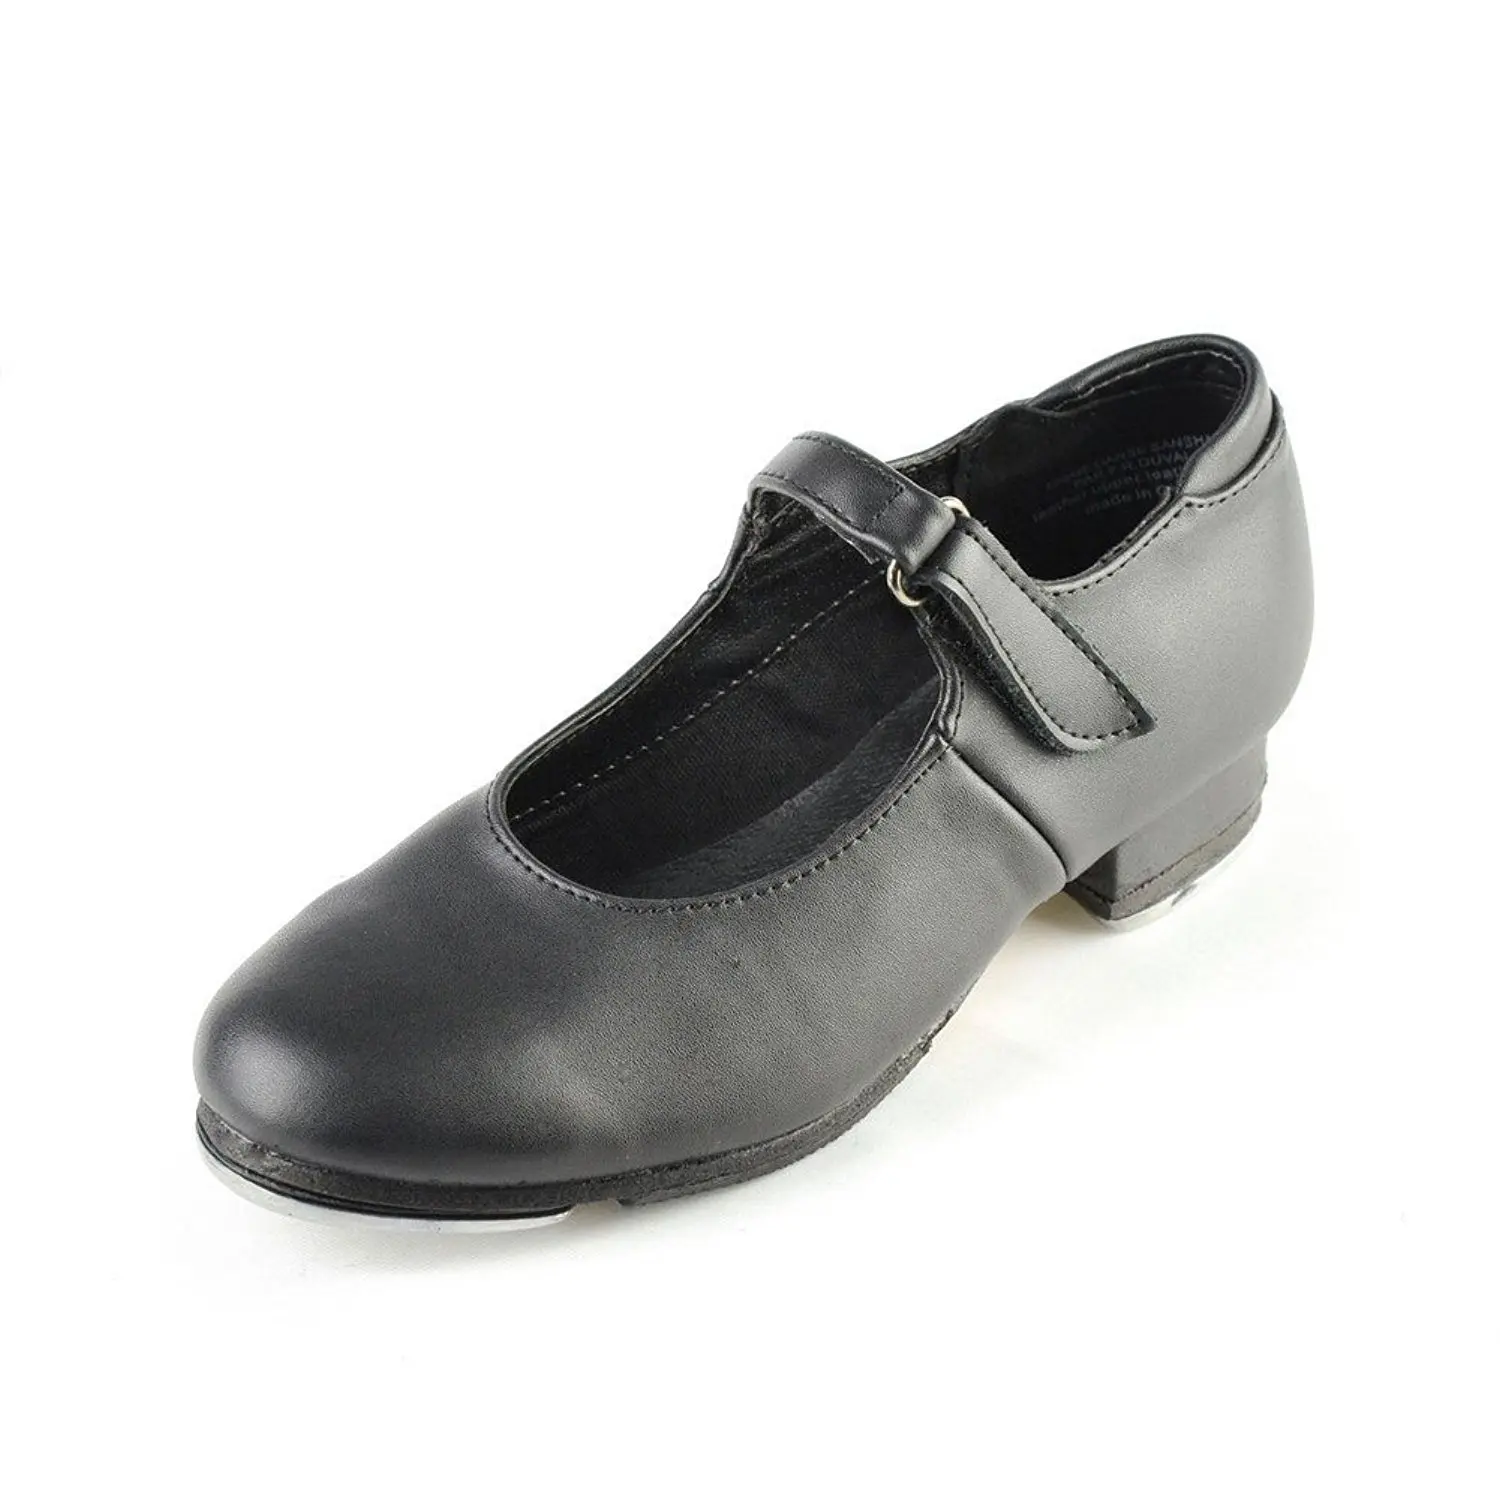 Buy Leather Upper Tap Dance Shoes Black 